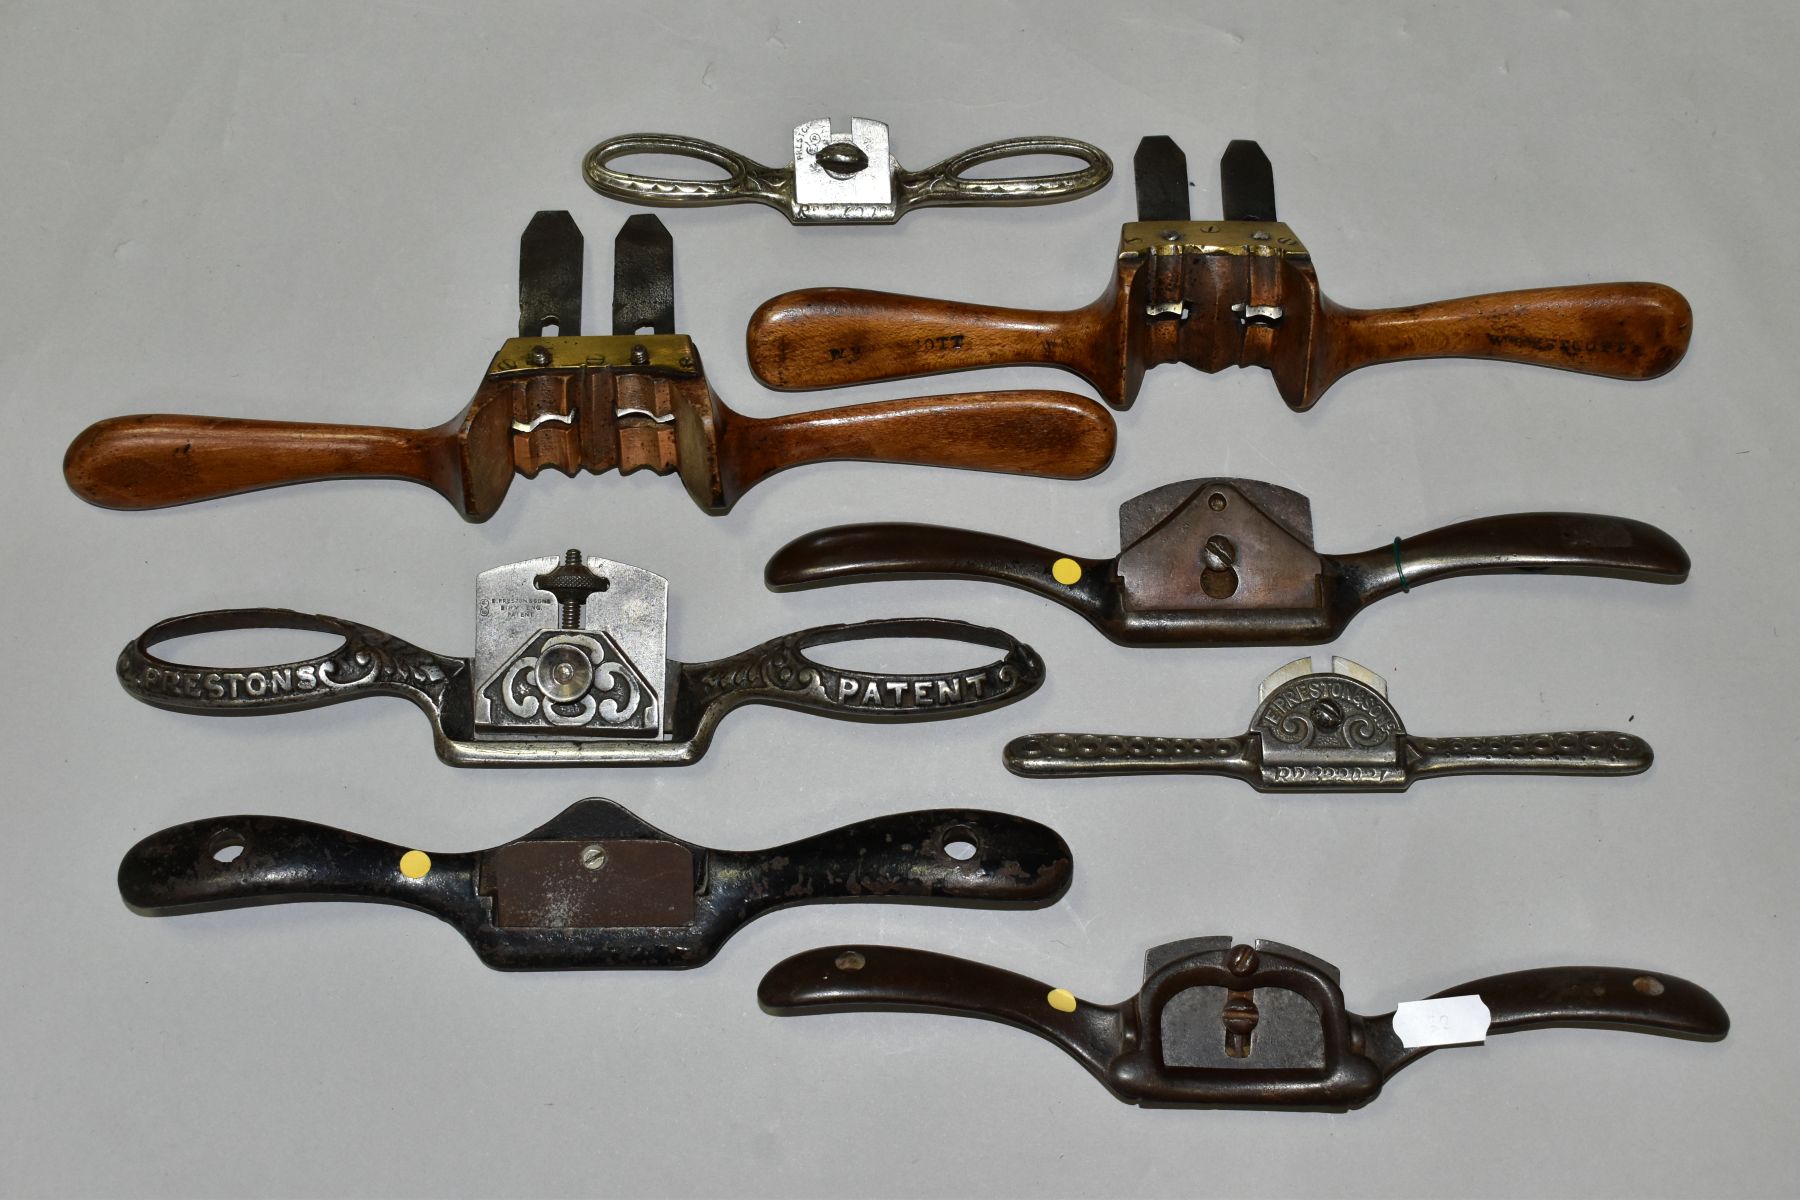 A TRAY CONTAINING EIGHT SPOKESHAVES, including two fruitwood Ovolo Sash Shaves (one left hand and